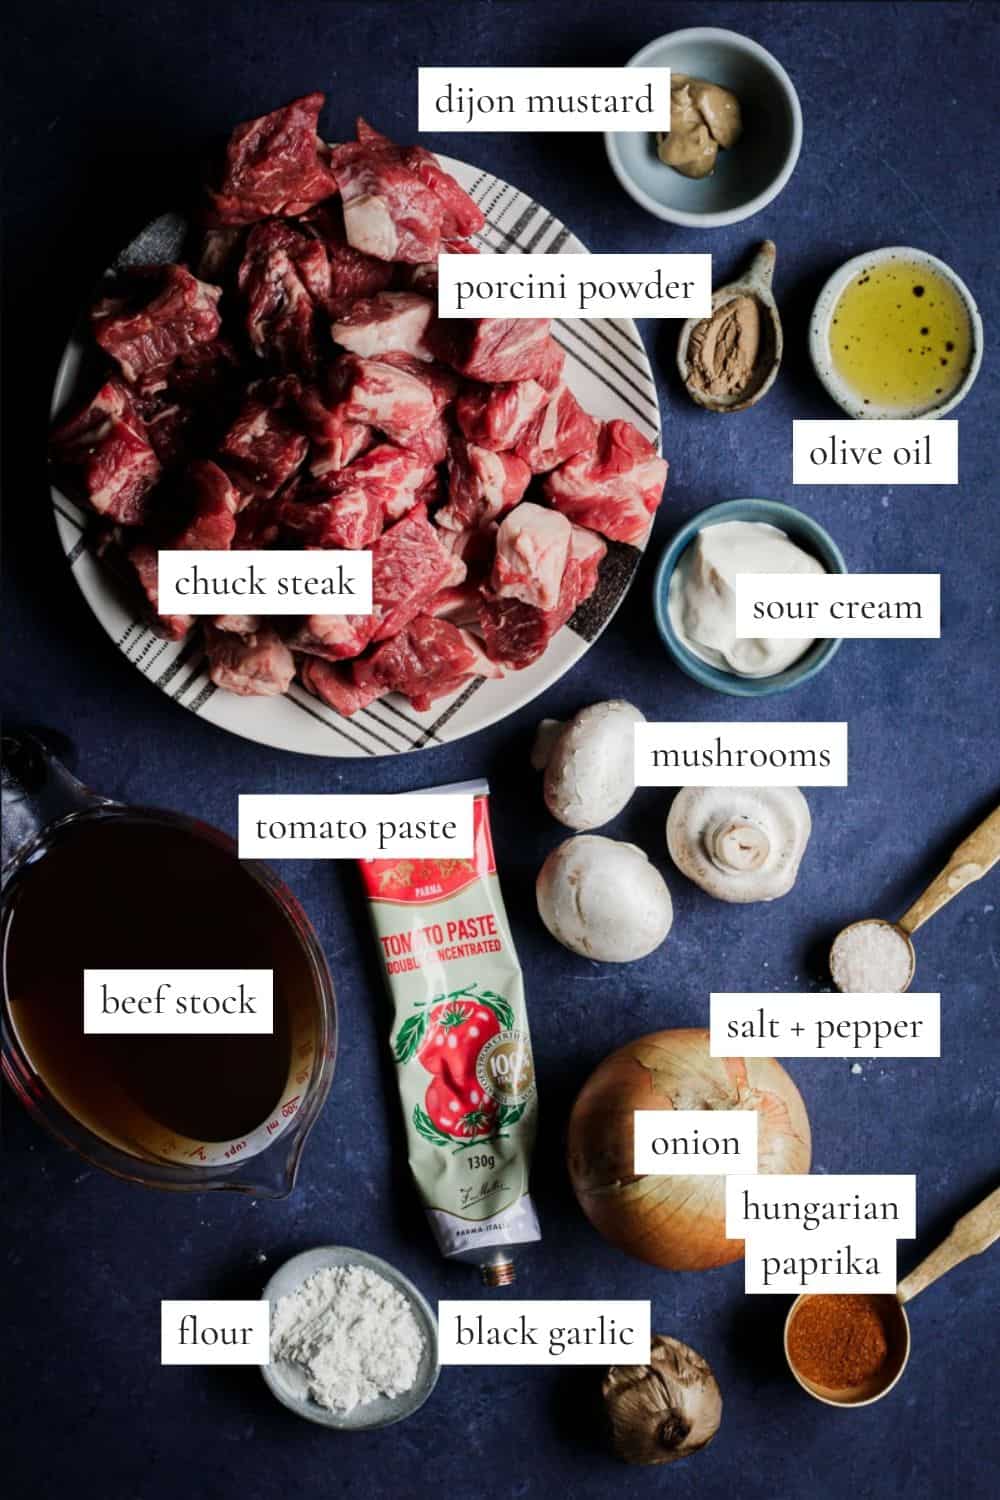 All the ingredients you need to make Dutch oven beef stroganoff.